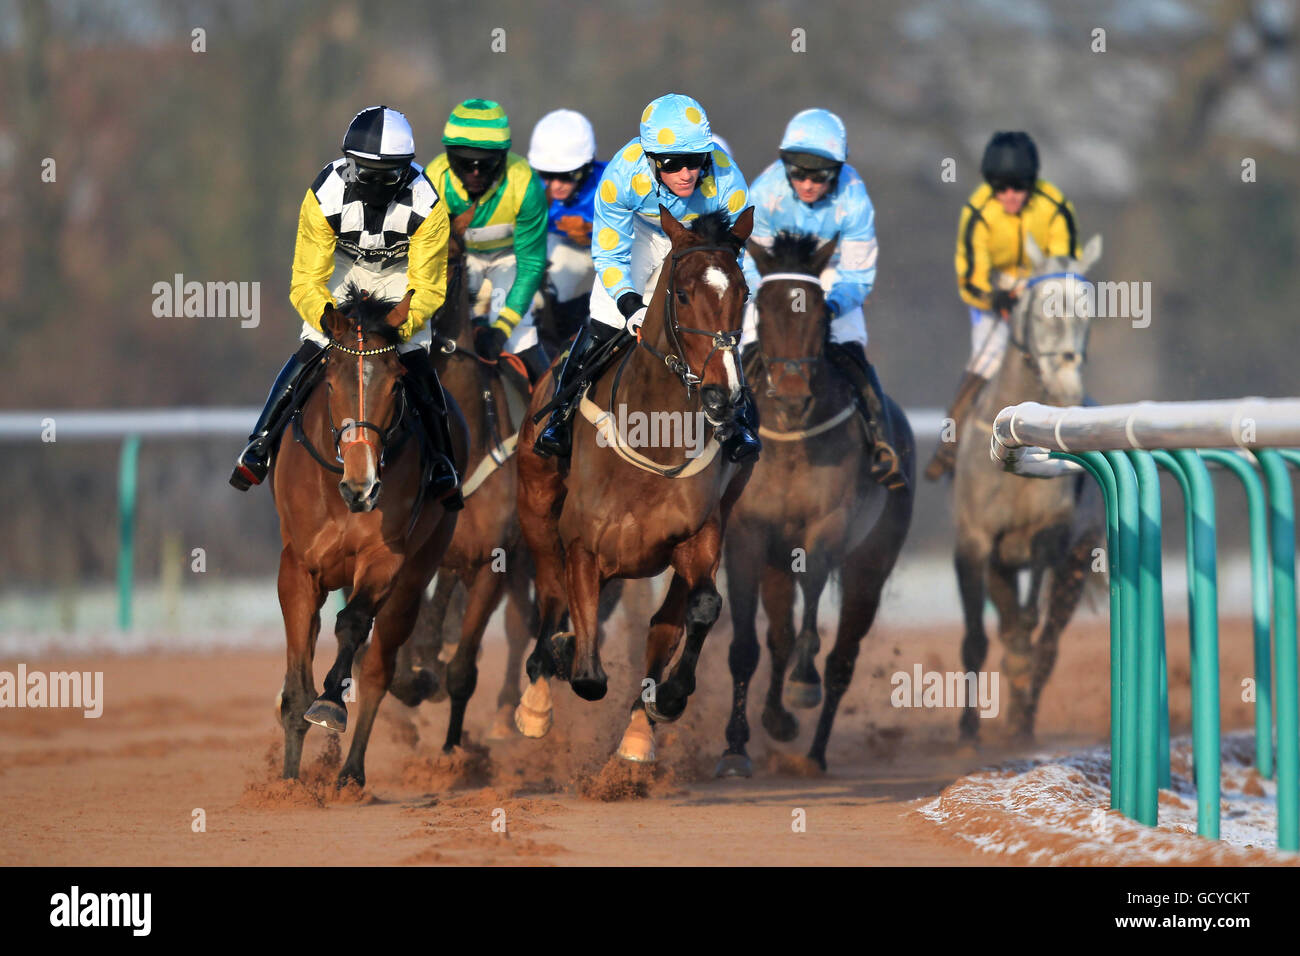 Action from the Bigger Wins With SP+ At totesport.com Standard Open NH Flat Race Stock Photo